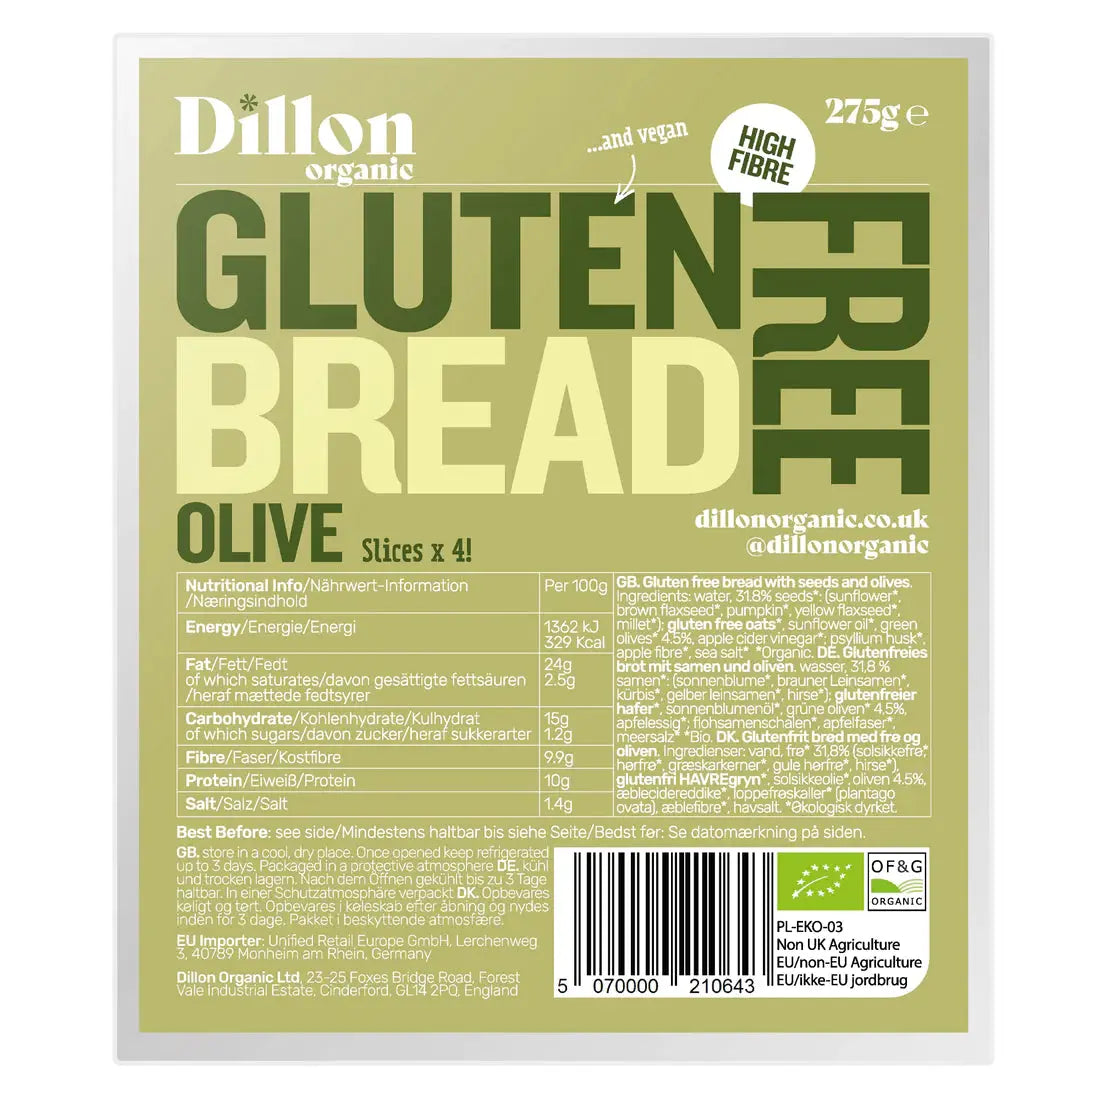 Dillon Organic Gluten Free Sliced Bread - Olive 270g - Sweet Victory Products Ltd